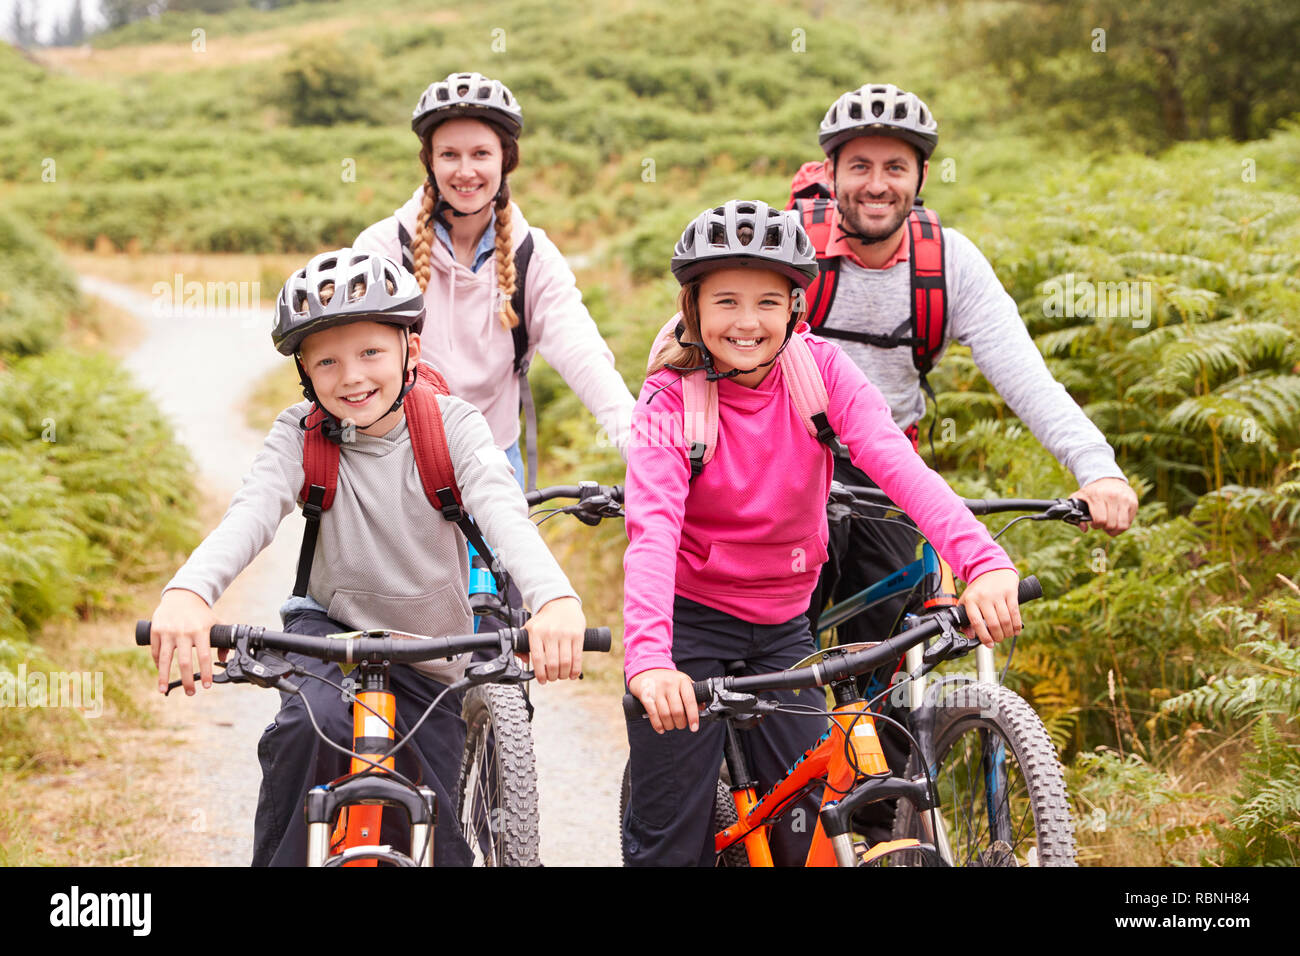 Portrait of parents and children sitting on mountain bikes in a country lane during a family camping trip, front view Stock Photo